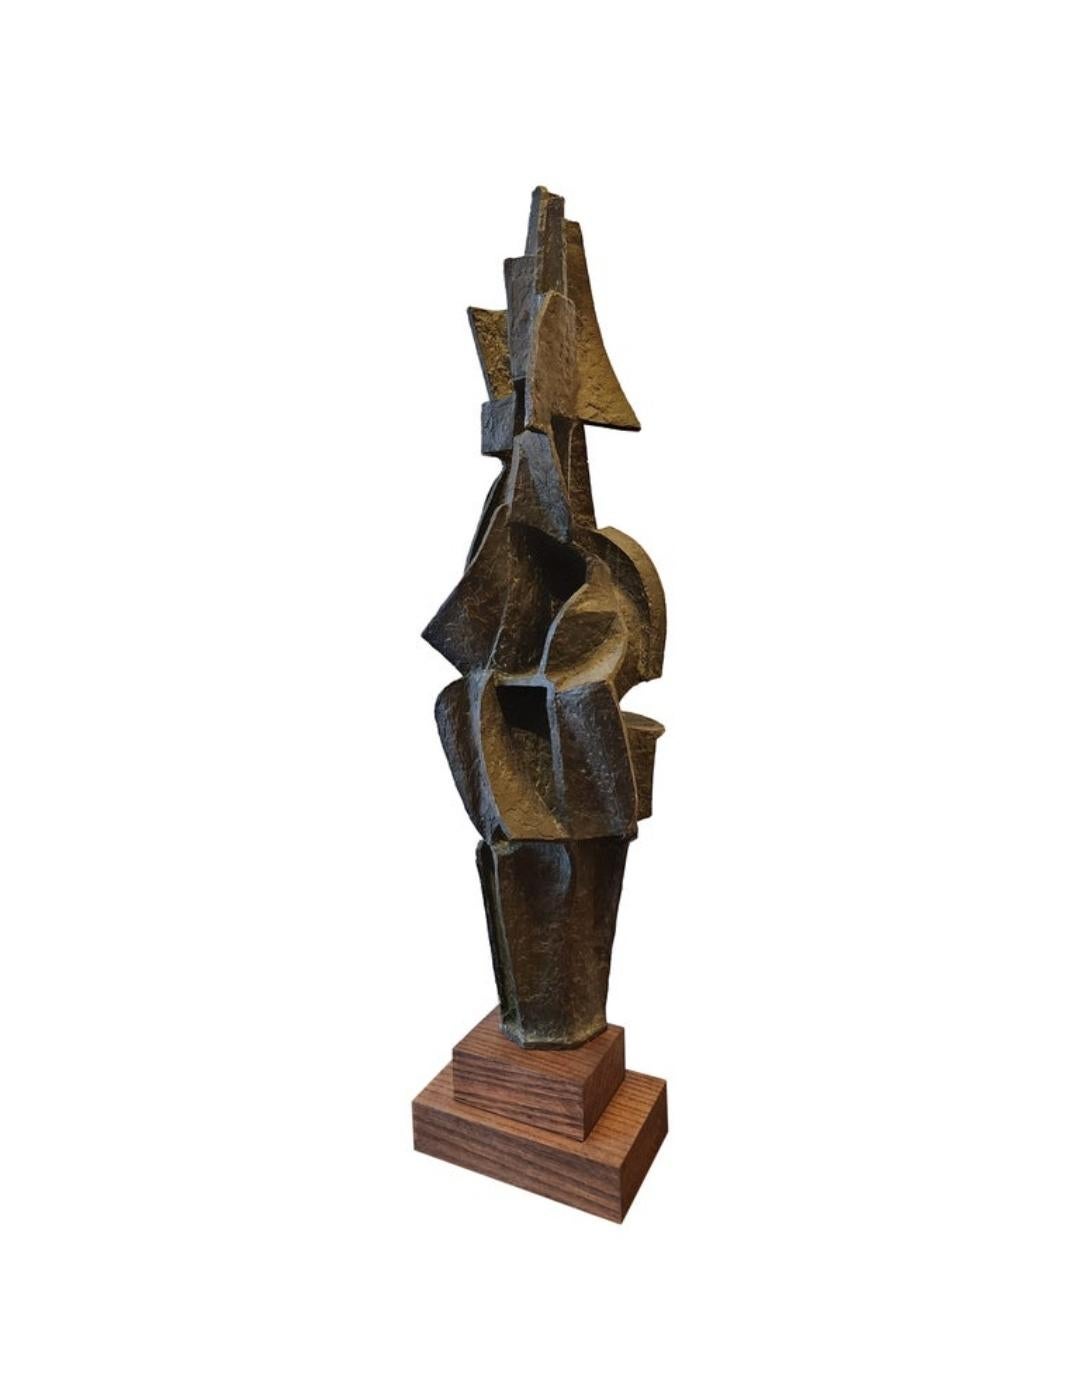 A beautiful and rarely seen bronze sculpture by American artist Gerald DiGiusto. Created while he was working in Italy in the 1950s. 
Gerald DiGiusto was born June 30, 1929 in New York City, the son of immigrant Italian and Jewish parents. He grew